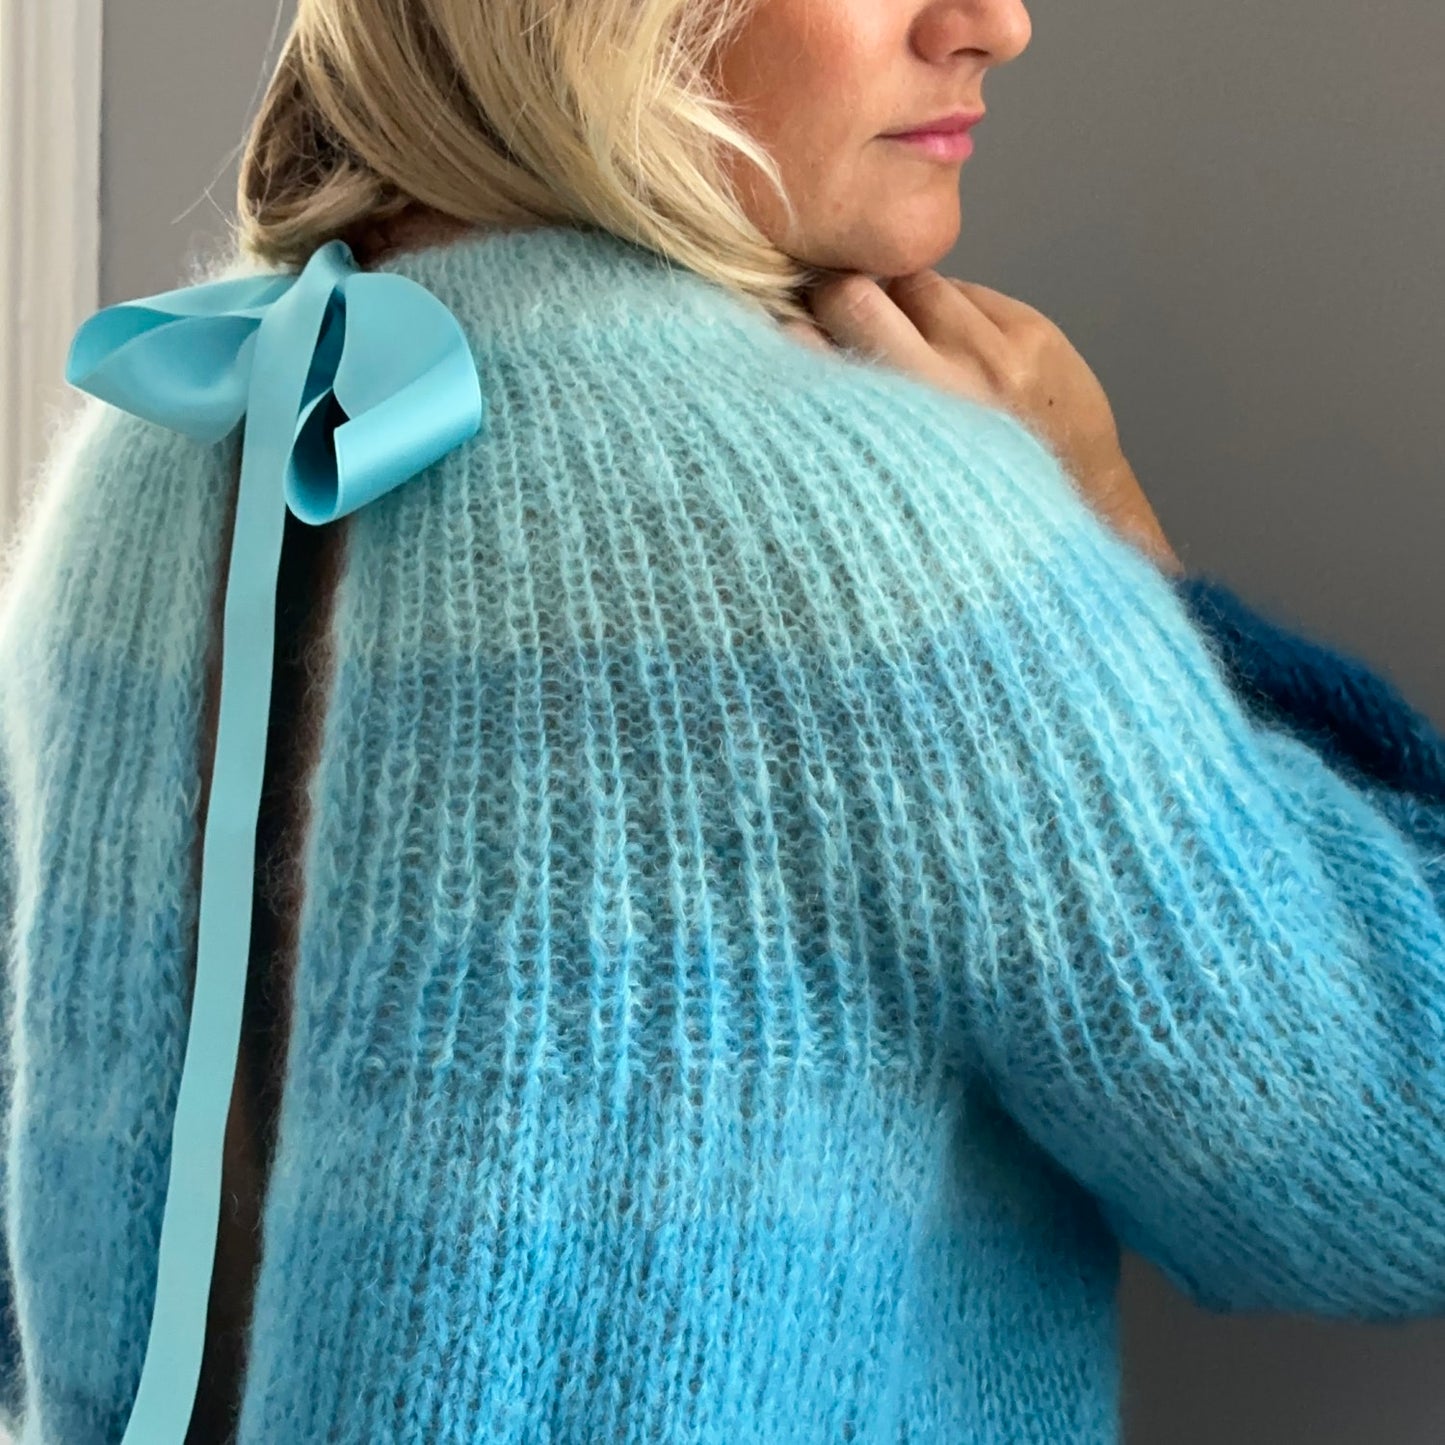 Unique open-back cardigan in soothing aqua shades